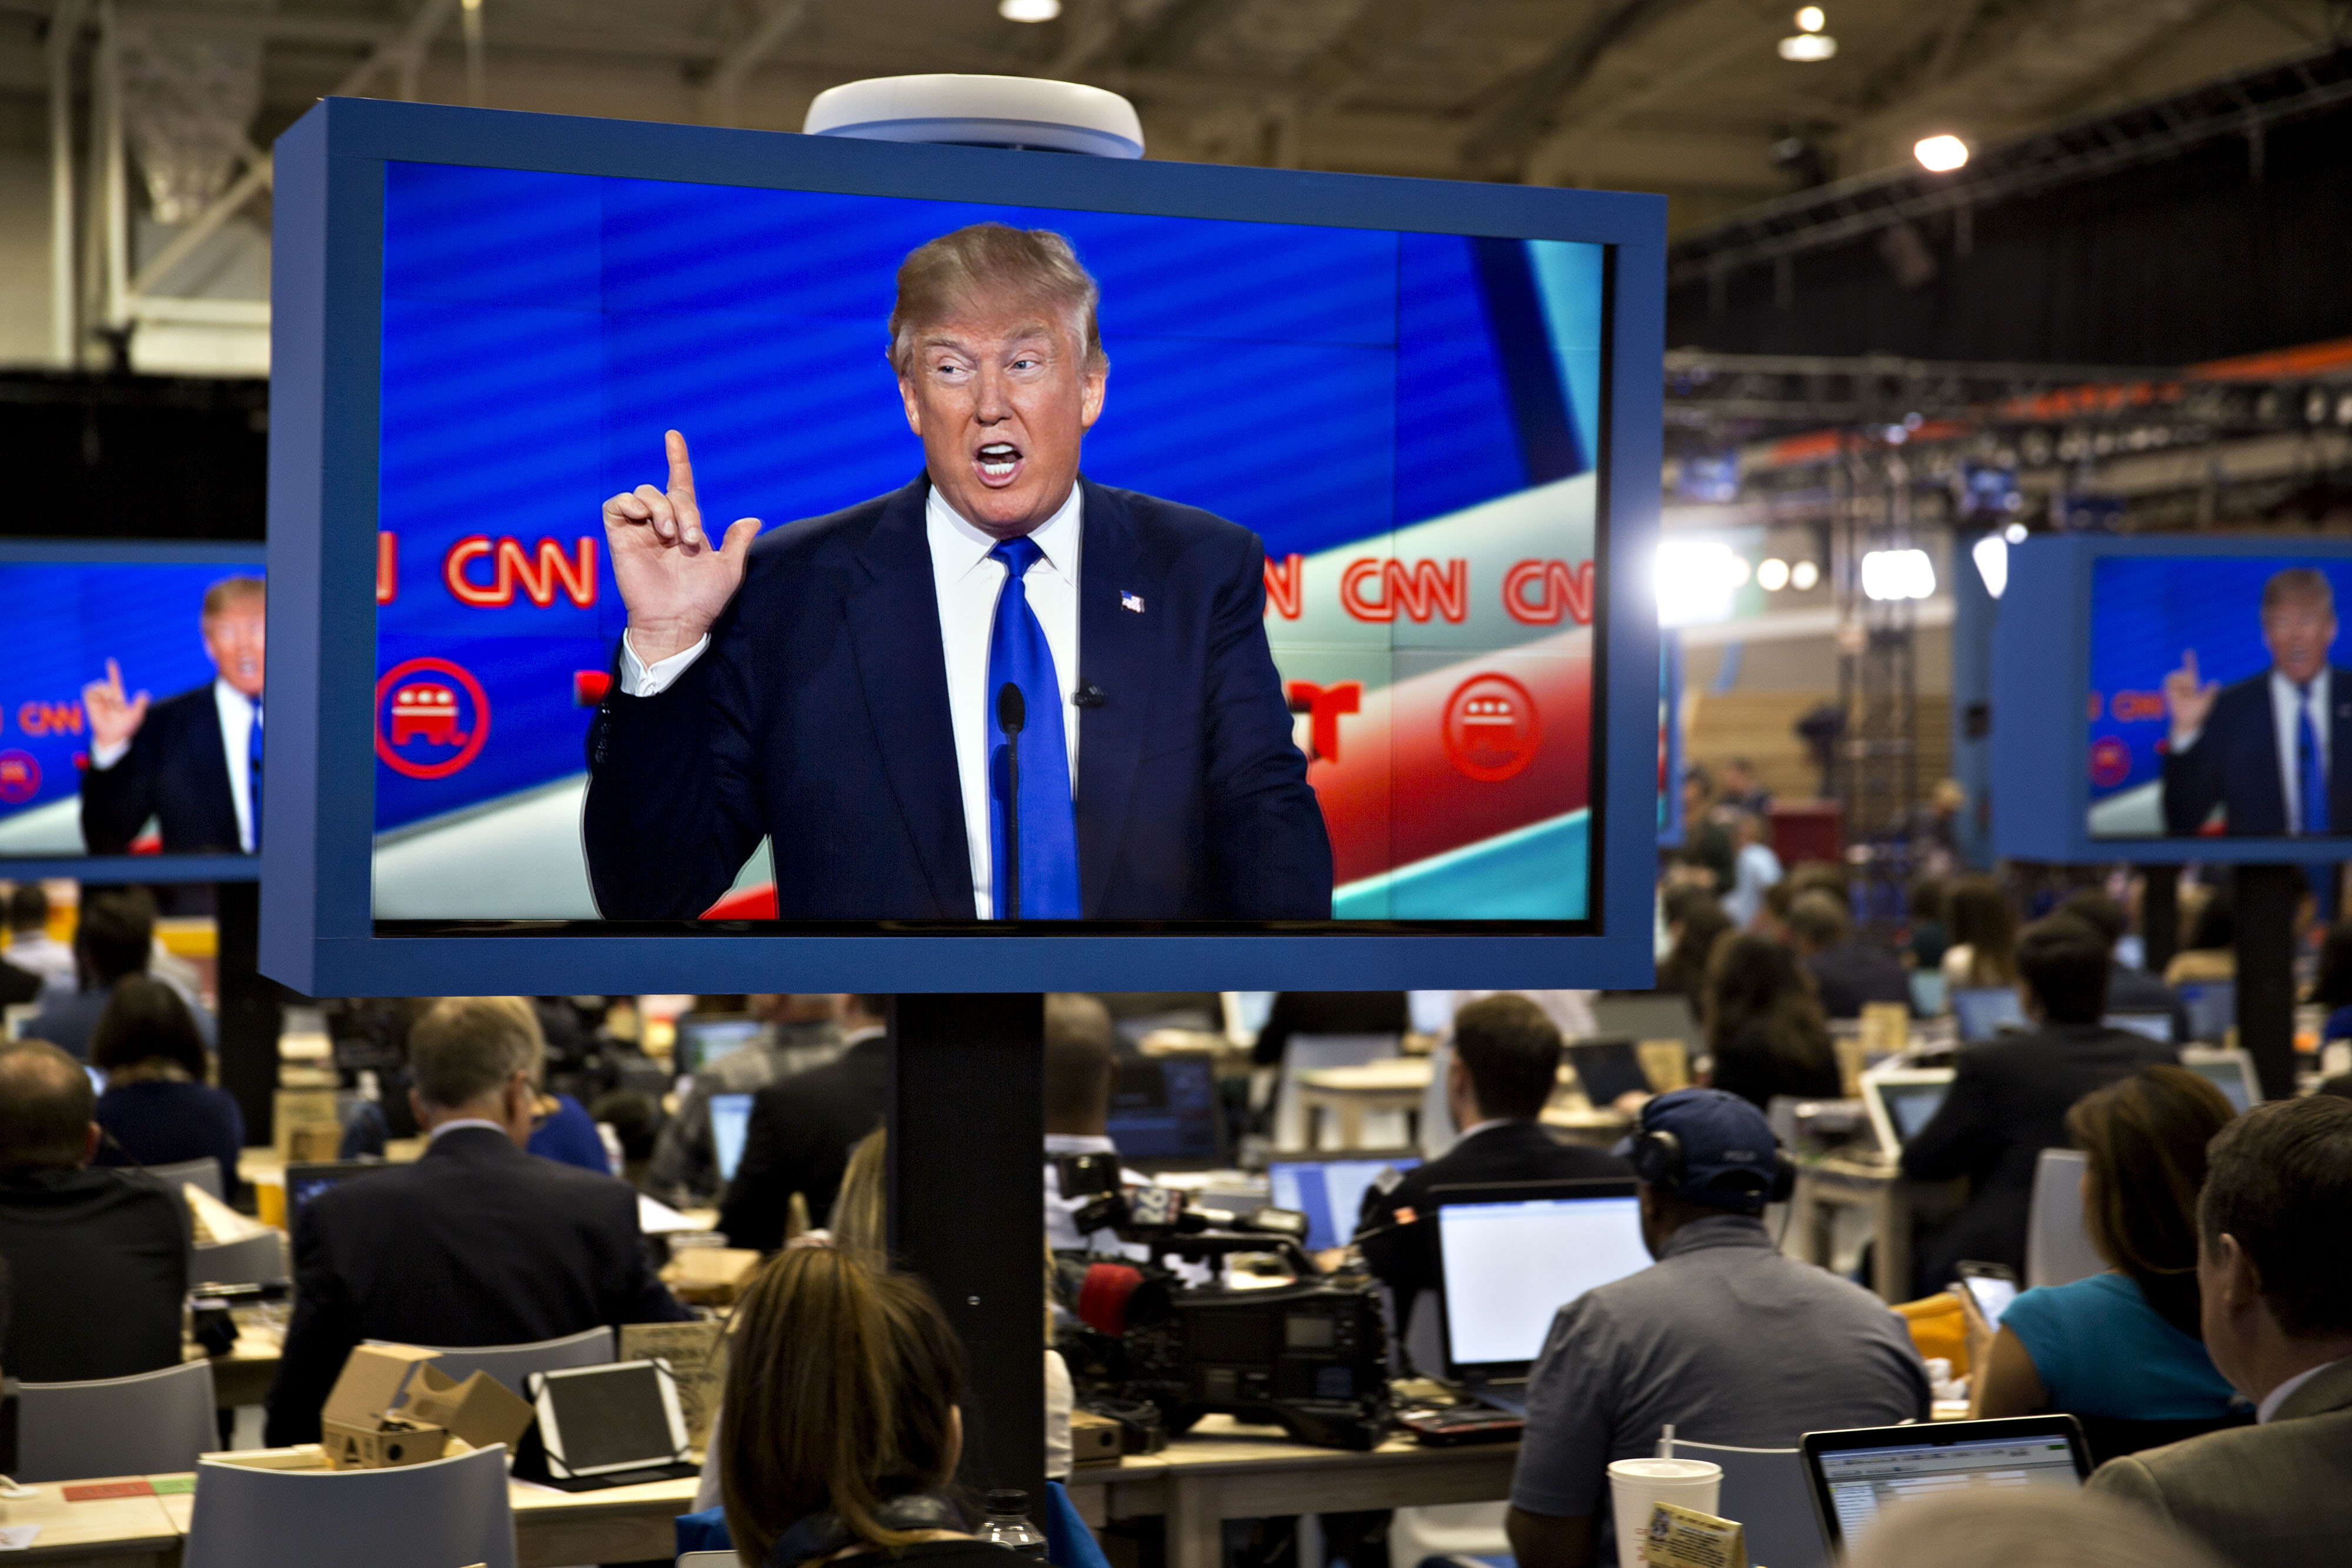 Donald Trump is seen speaking on a television screen in the filing center during the Republican presidential primary candidate debate sponsored by CNN and Telemundo at the University of Houston in Houston on  Feb. 25, 2016. (Bloomberg via Getty Images)